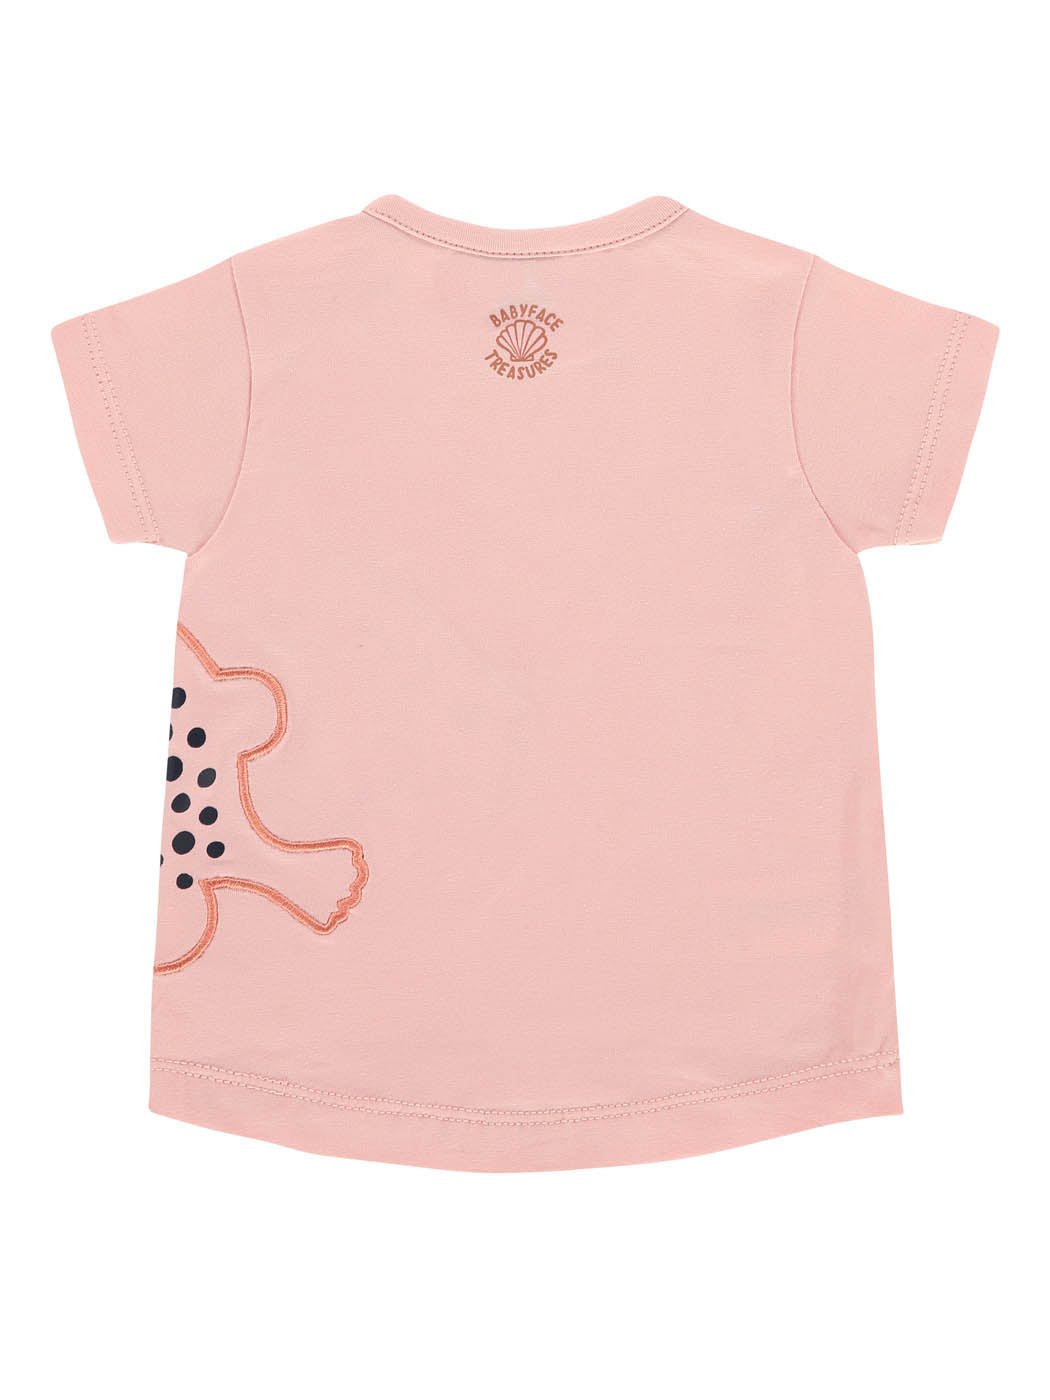 Babyface - Baby T-Shirt  for girl - NWB21228650 Pink